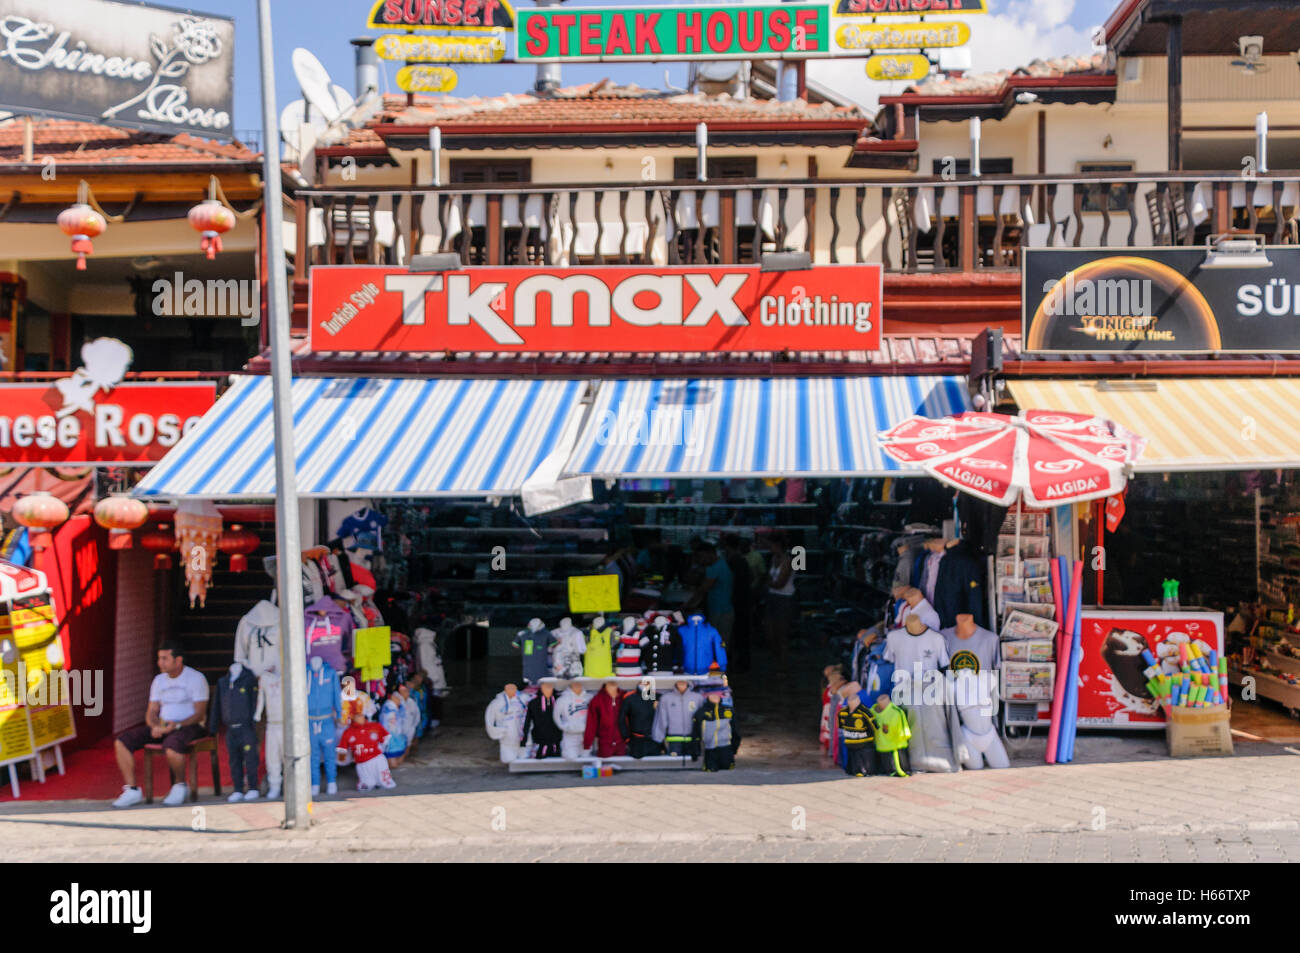 Shop in Turkey called TK Max" selling counterfeit clothing, sportswear and  handbags Stock Photo - Alamy